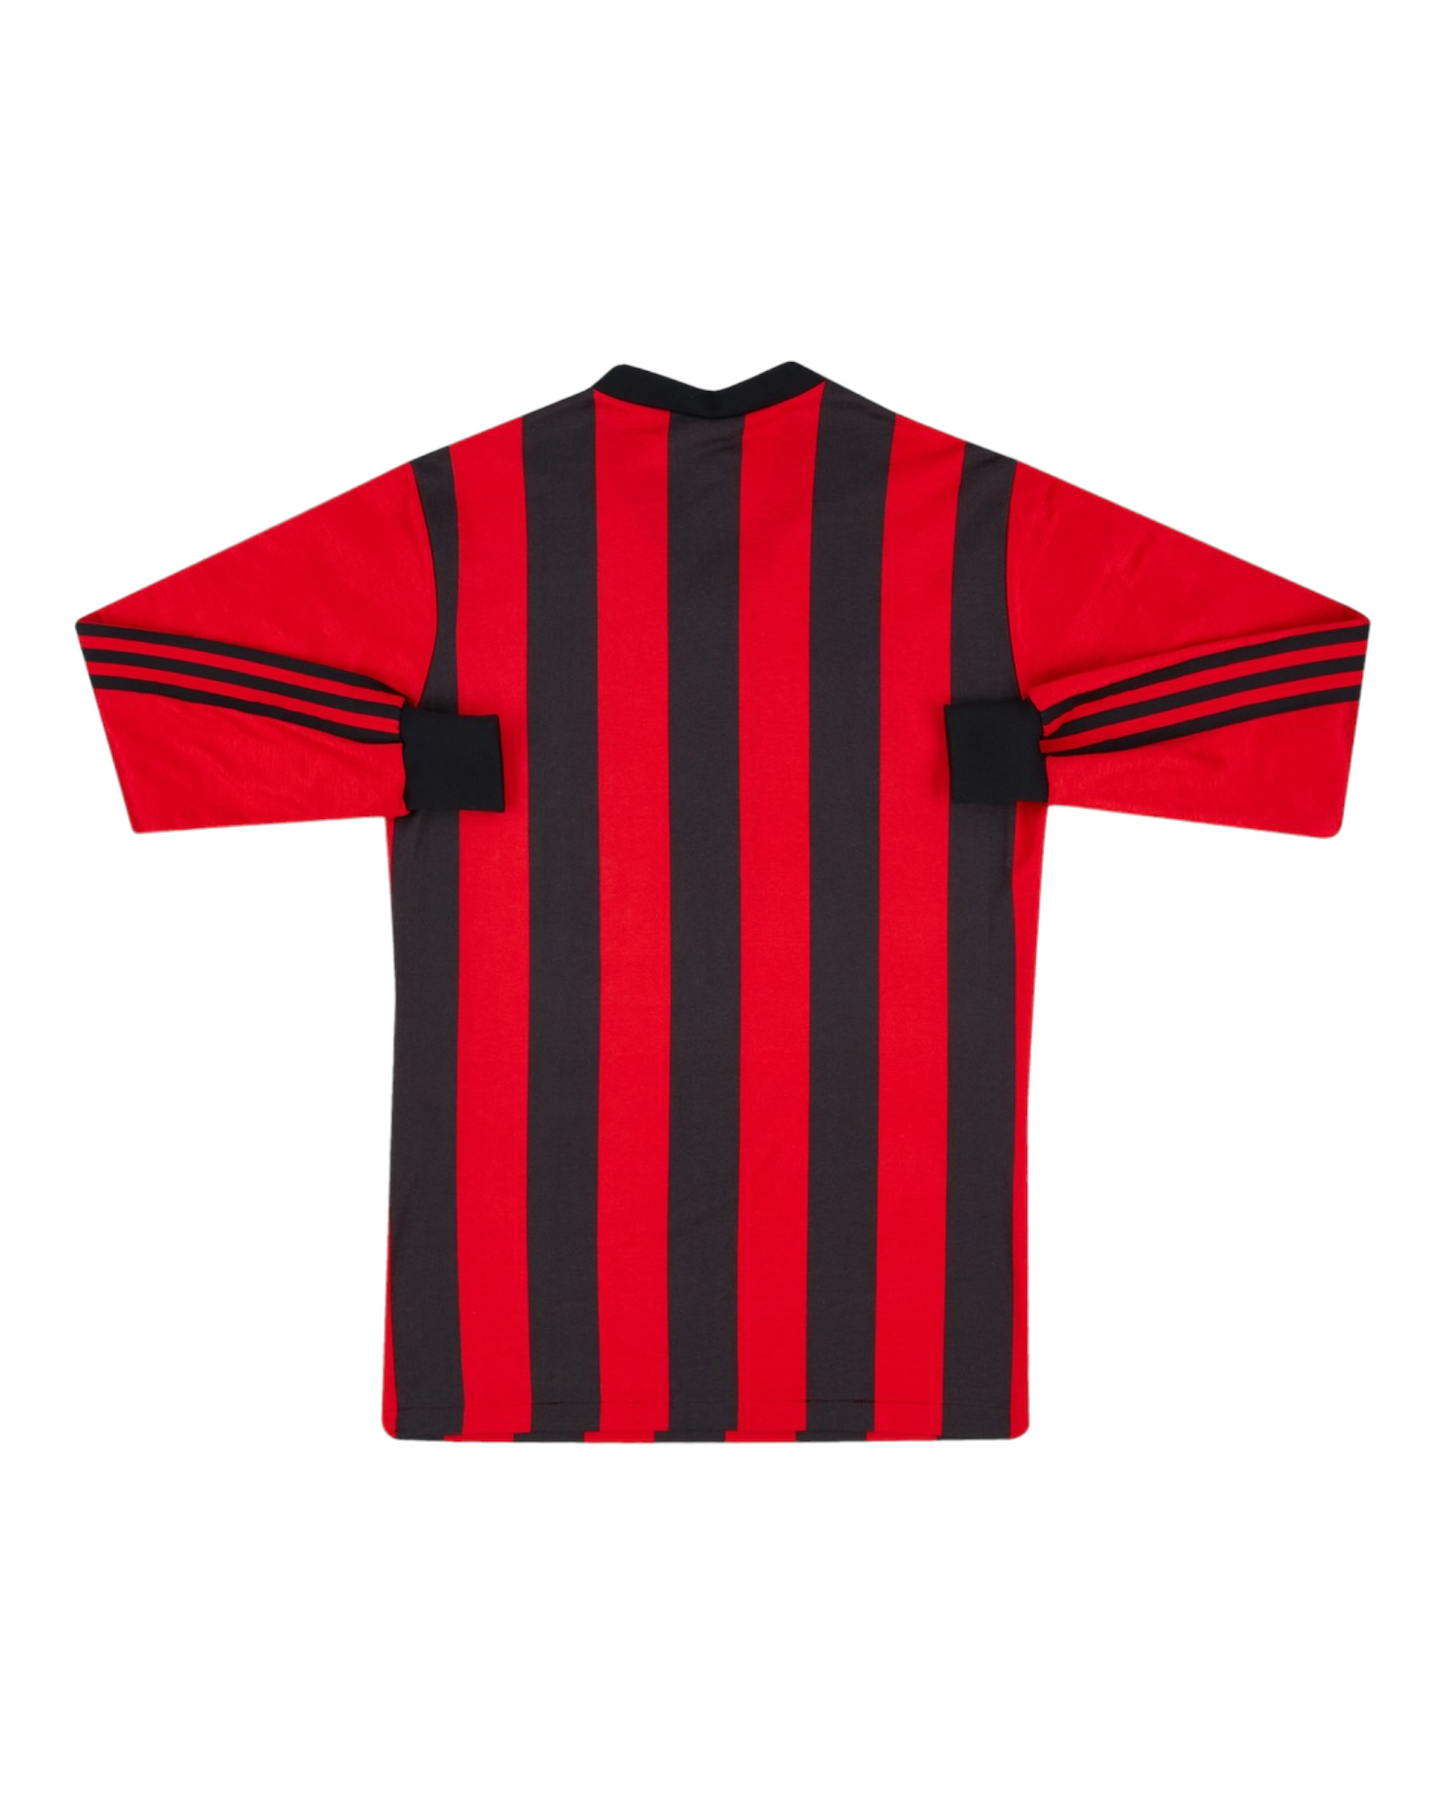 Neuchatel Xamax Adidas 1985-1987 Home Football Shirt Meubles Meyer Long Sleeves Red Black Made in Western Germany